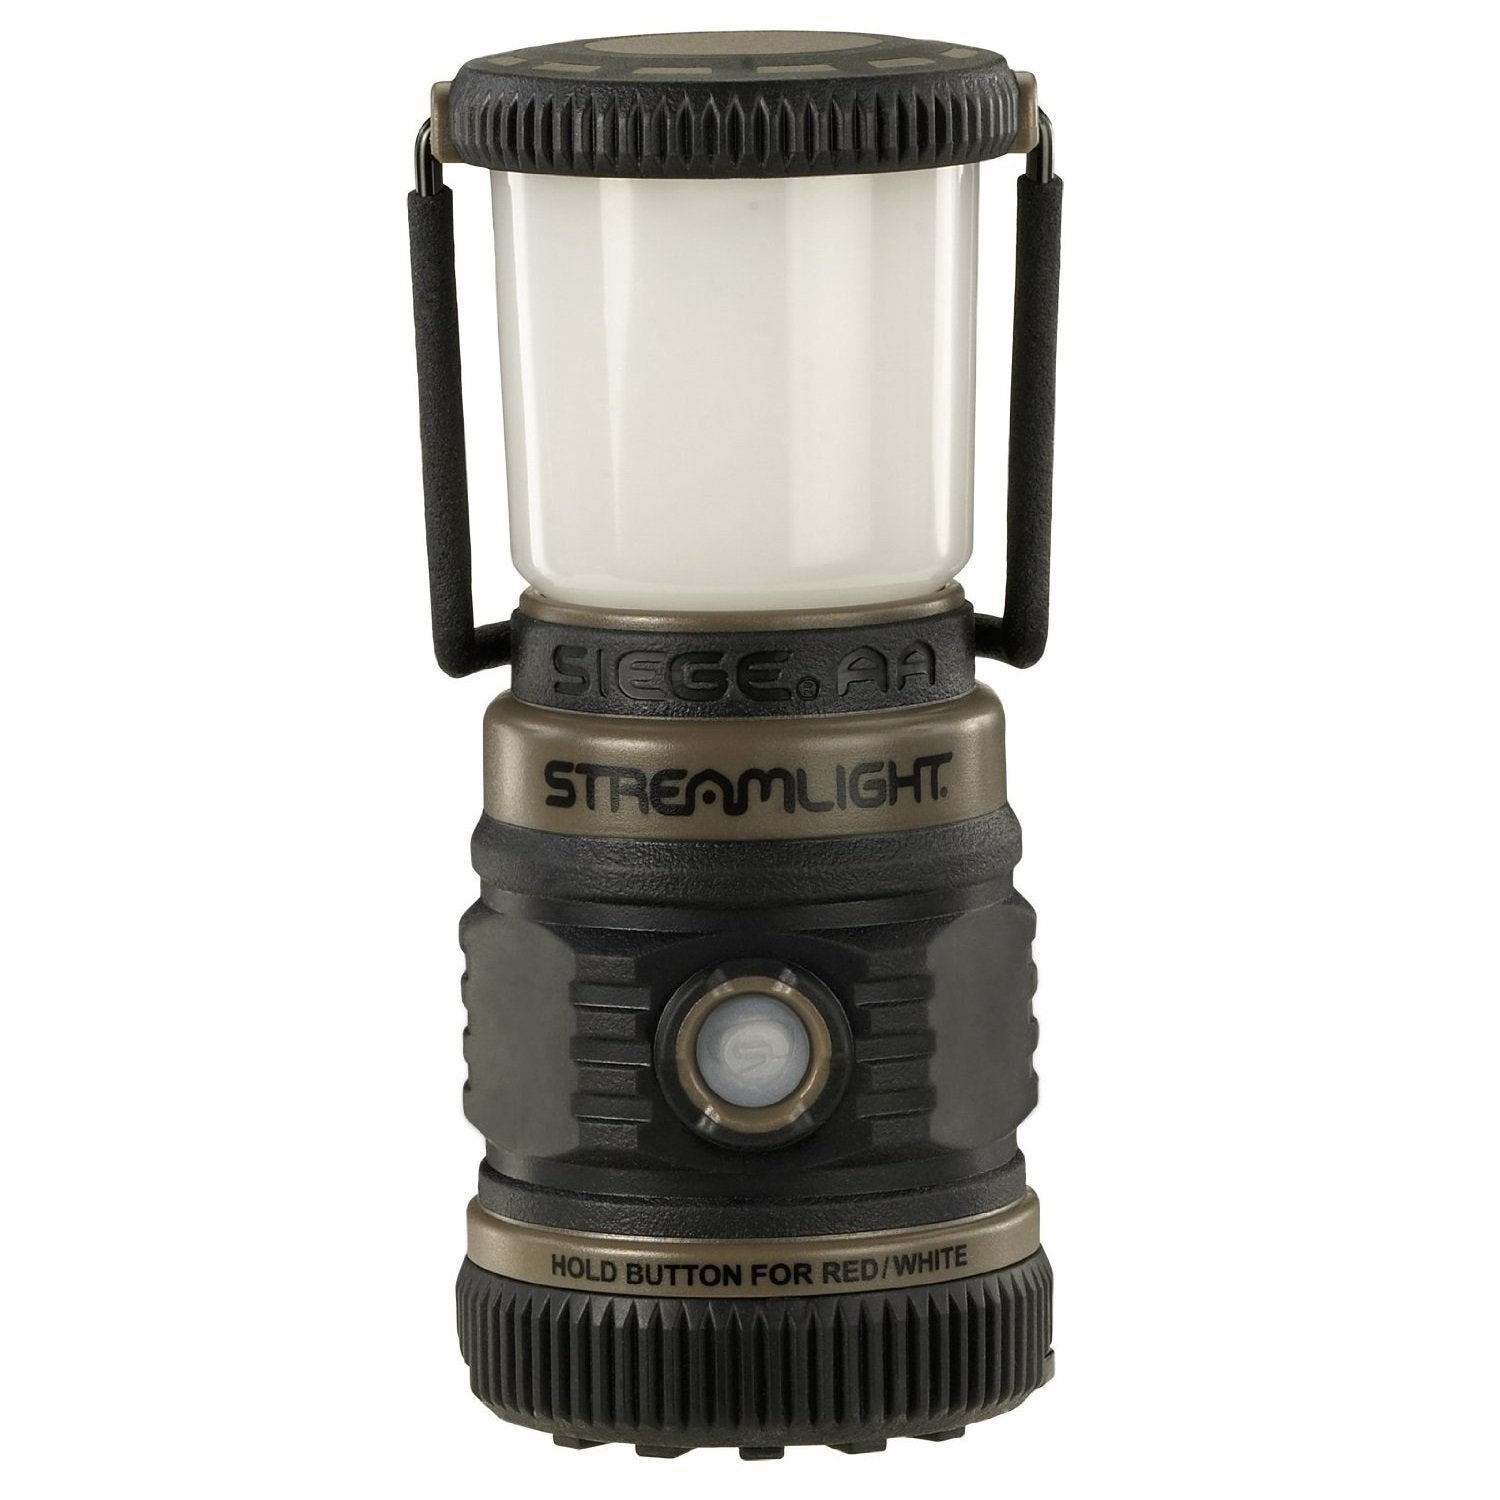 Streamlight Siege AA 200-Lumens Compact Lantern with Magnetic Base - Coyote Tactical Distributors Ltd New Zealand